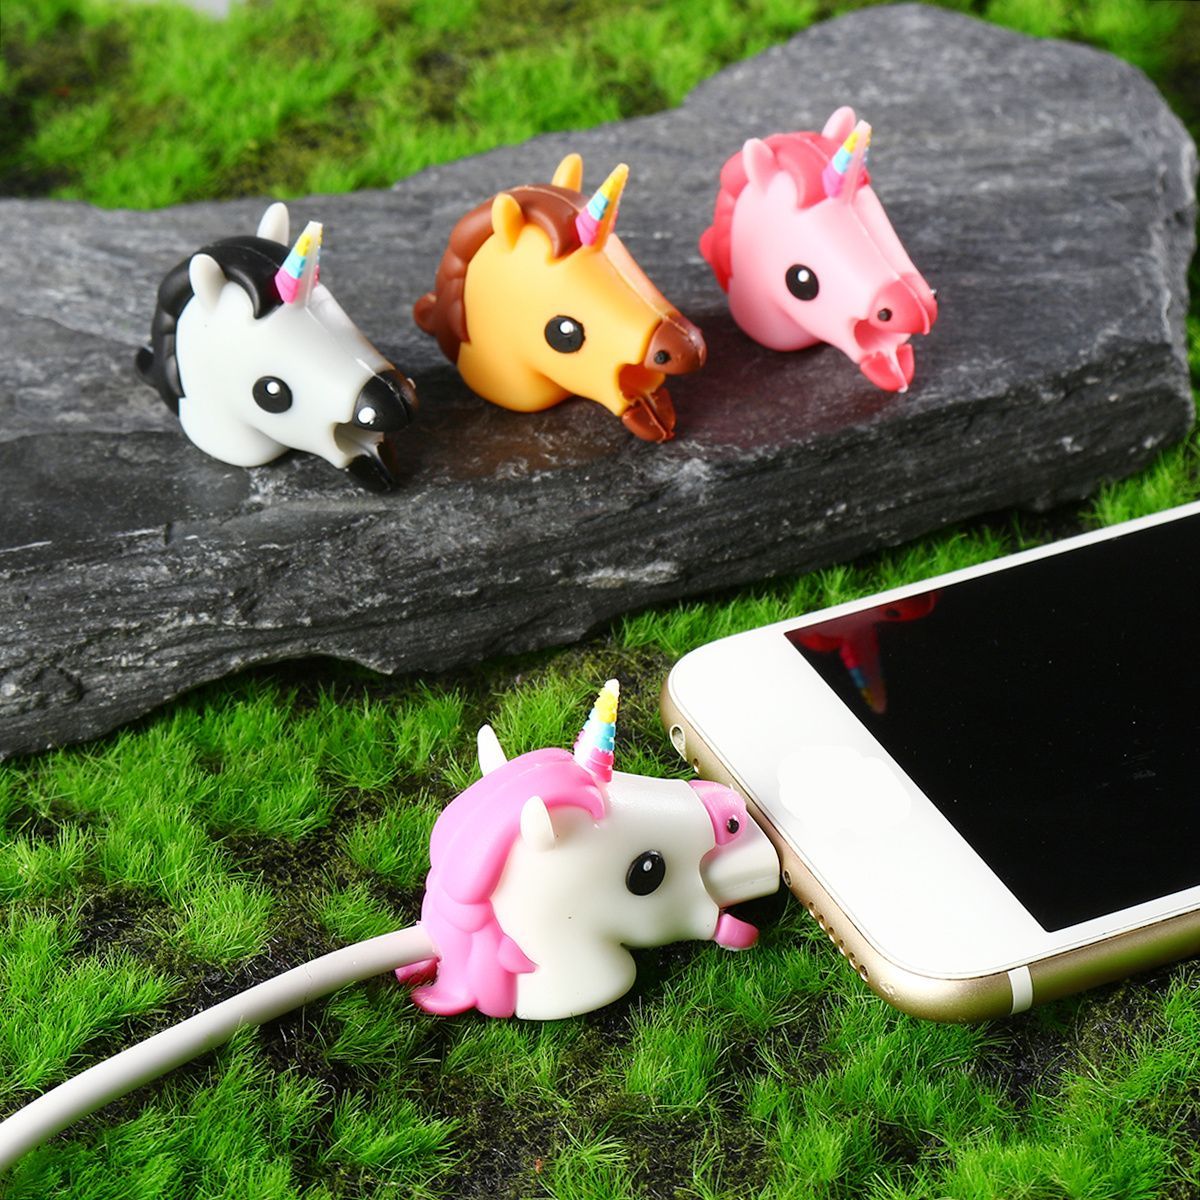 Cable-Accessory-Cable-Animal-Bites-Cartoon-USB-Charger-Data-Cable-Cord-Protector-1517800